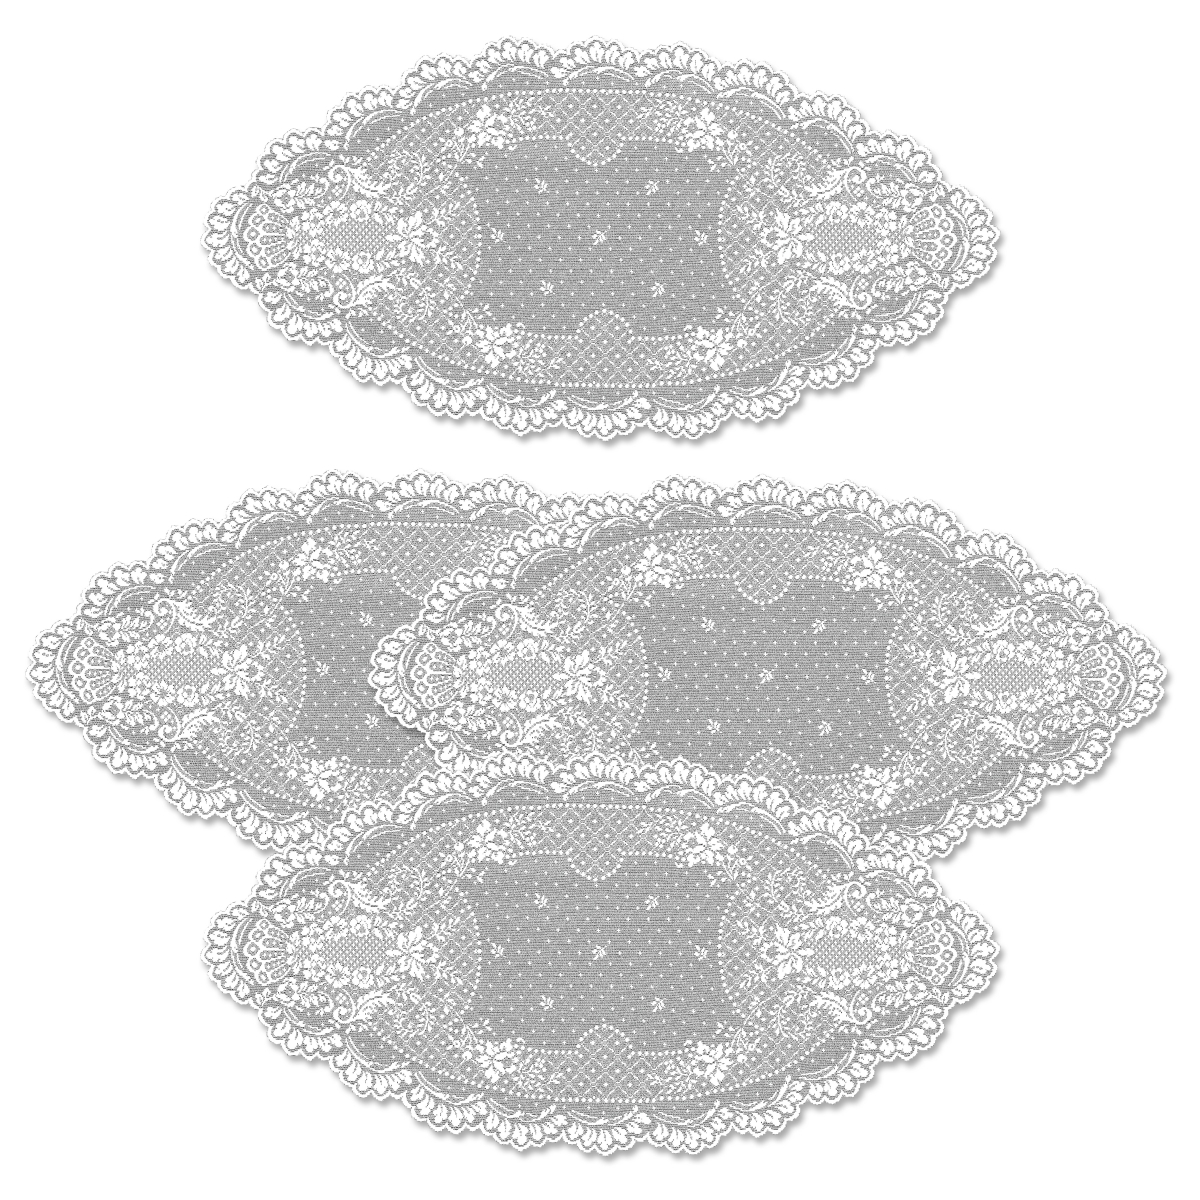 Picture of Heritage Lace FO-1428W-S 14 x 28 in. Floret Doily - White - Set of 4